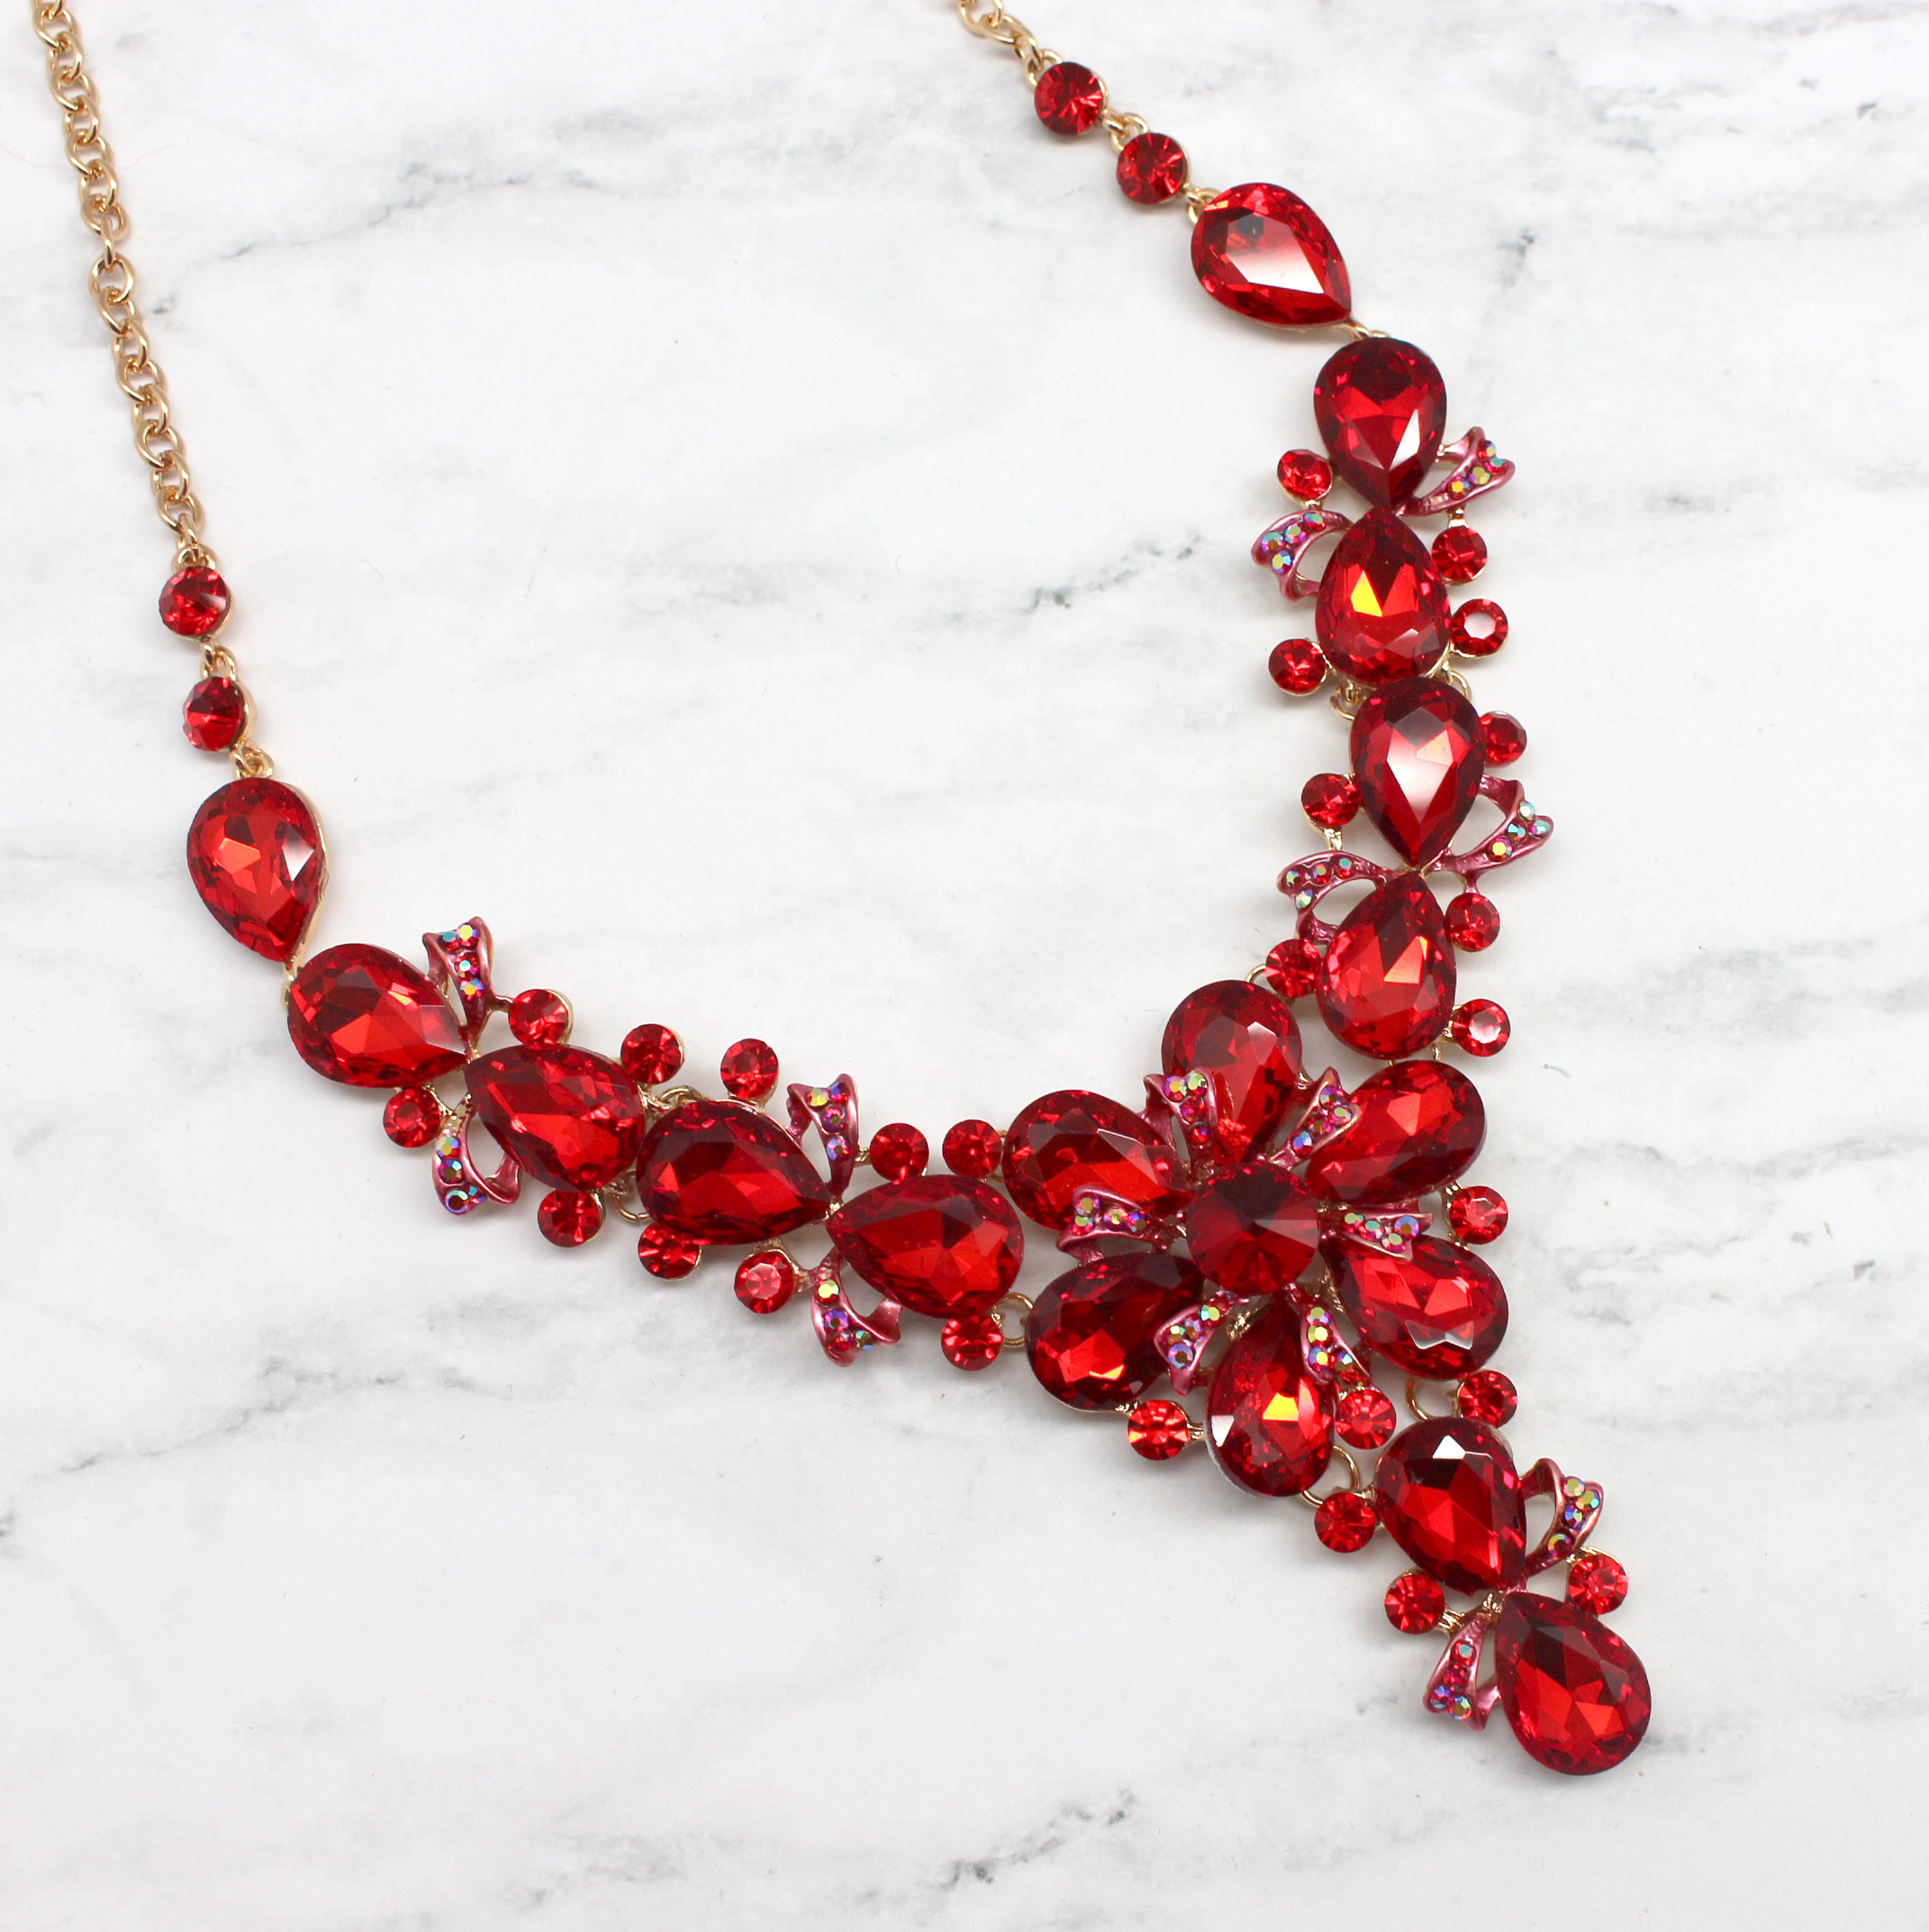 Sequel Afgift Spekulerer Seeing Red Necklace - Best of Everything | Online Shopping